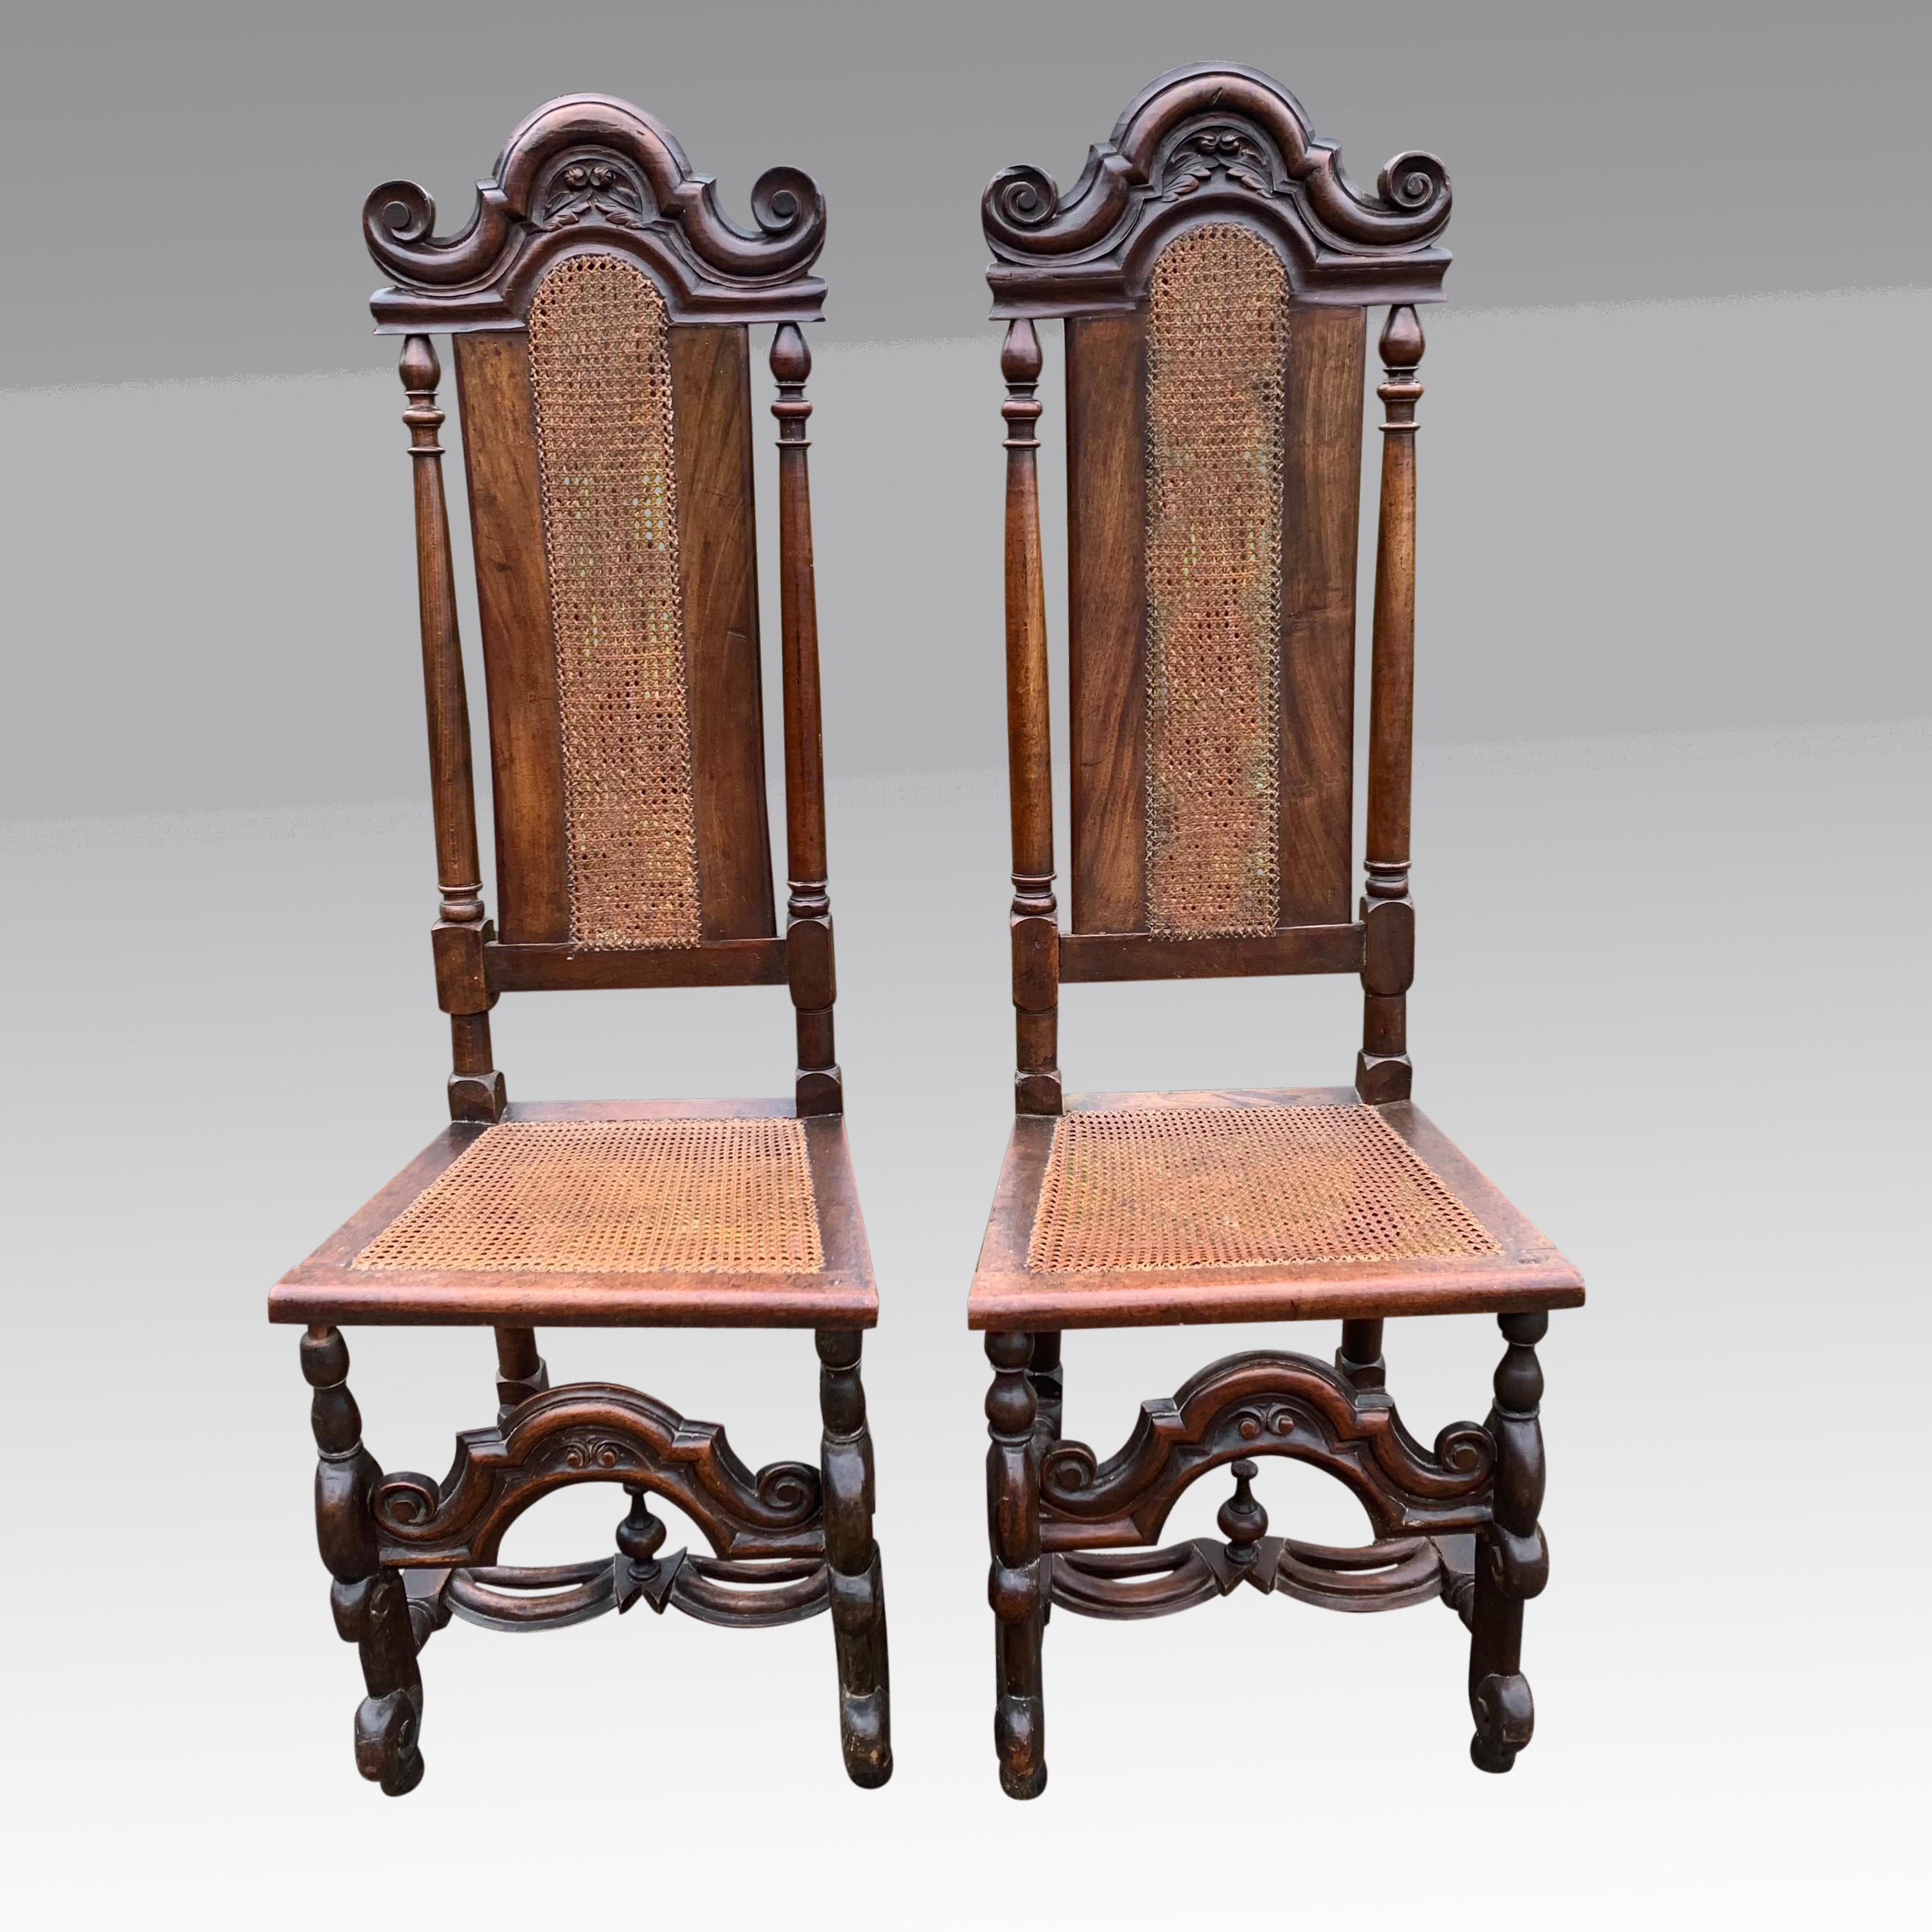 A good pair of mid 19th century Carolean style chairs in walnut with caned seats and backs. The high backs with decorative cresting rails carved with leaves and flowerheads, flanked by upward scrolling ends which sit above the central caned splats